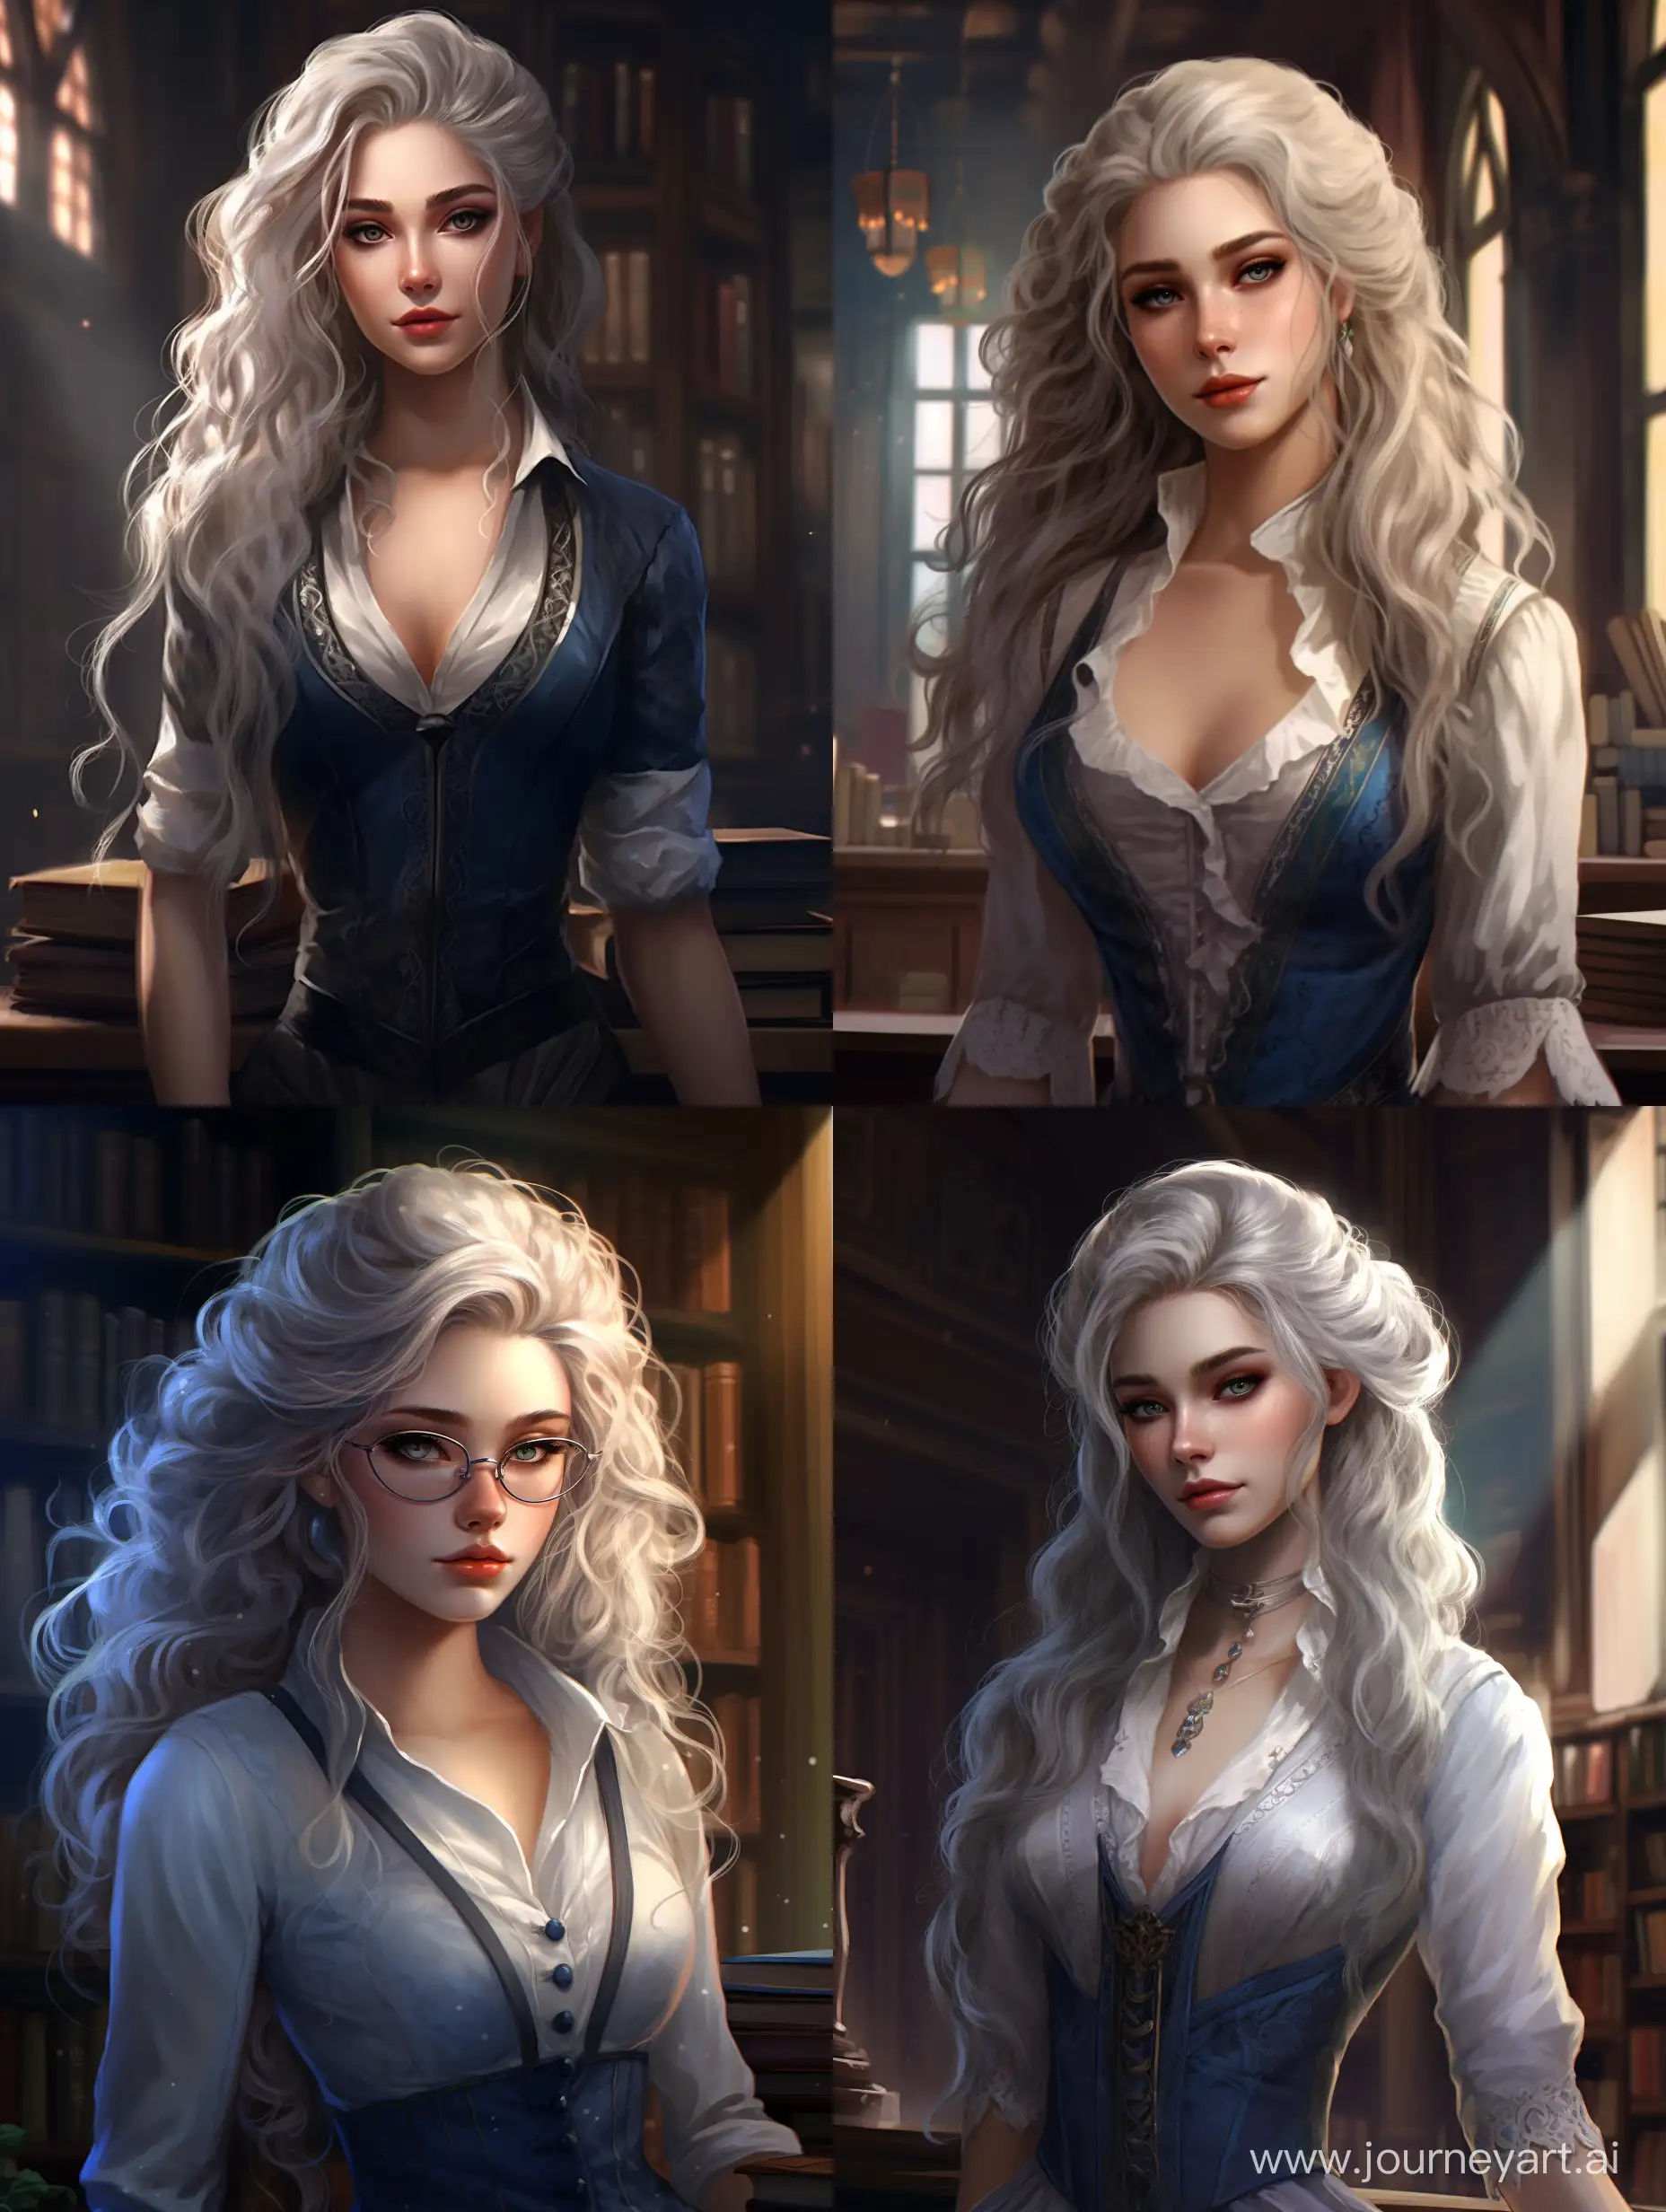 elf young woman, fantasy blue librarian clothing, white fluffy hair, blue eyes, library library, portrait